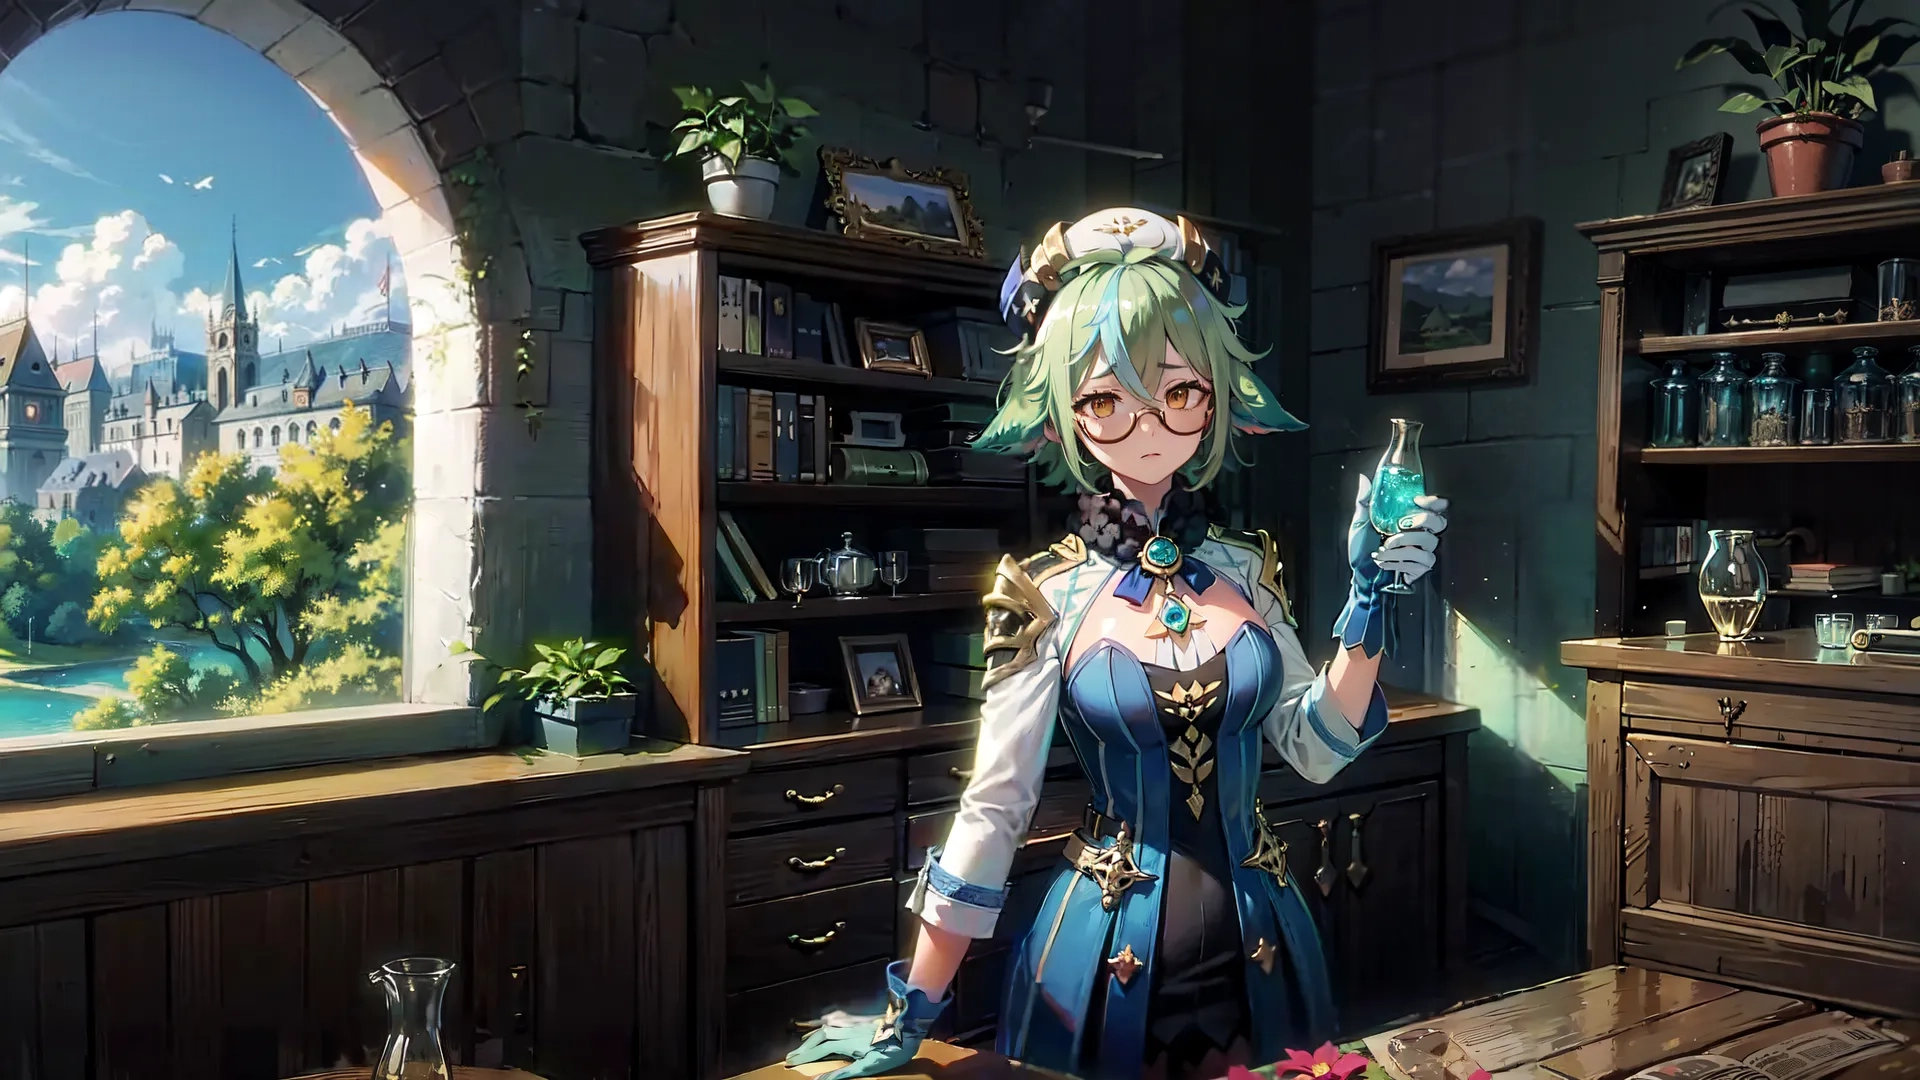 a sexy person dressed in anime poses for the camera and appears to be holding her bottle and looking confused while standing at a desk near a window
